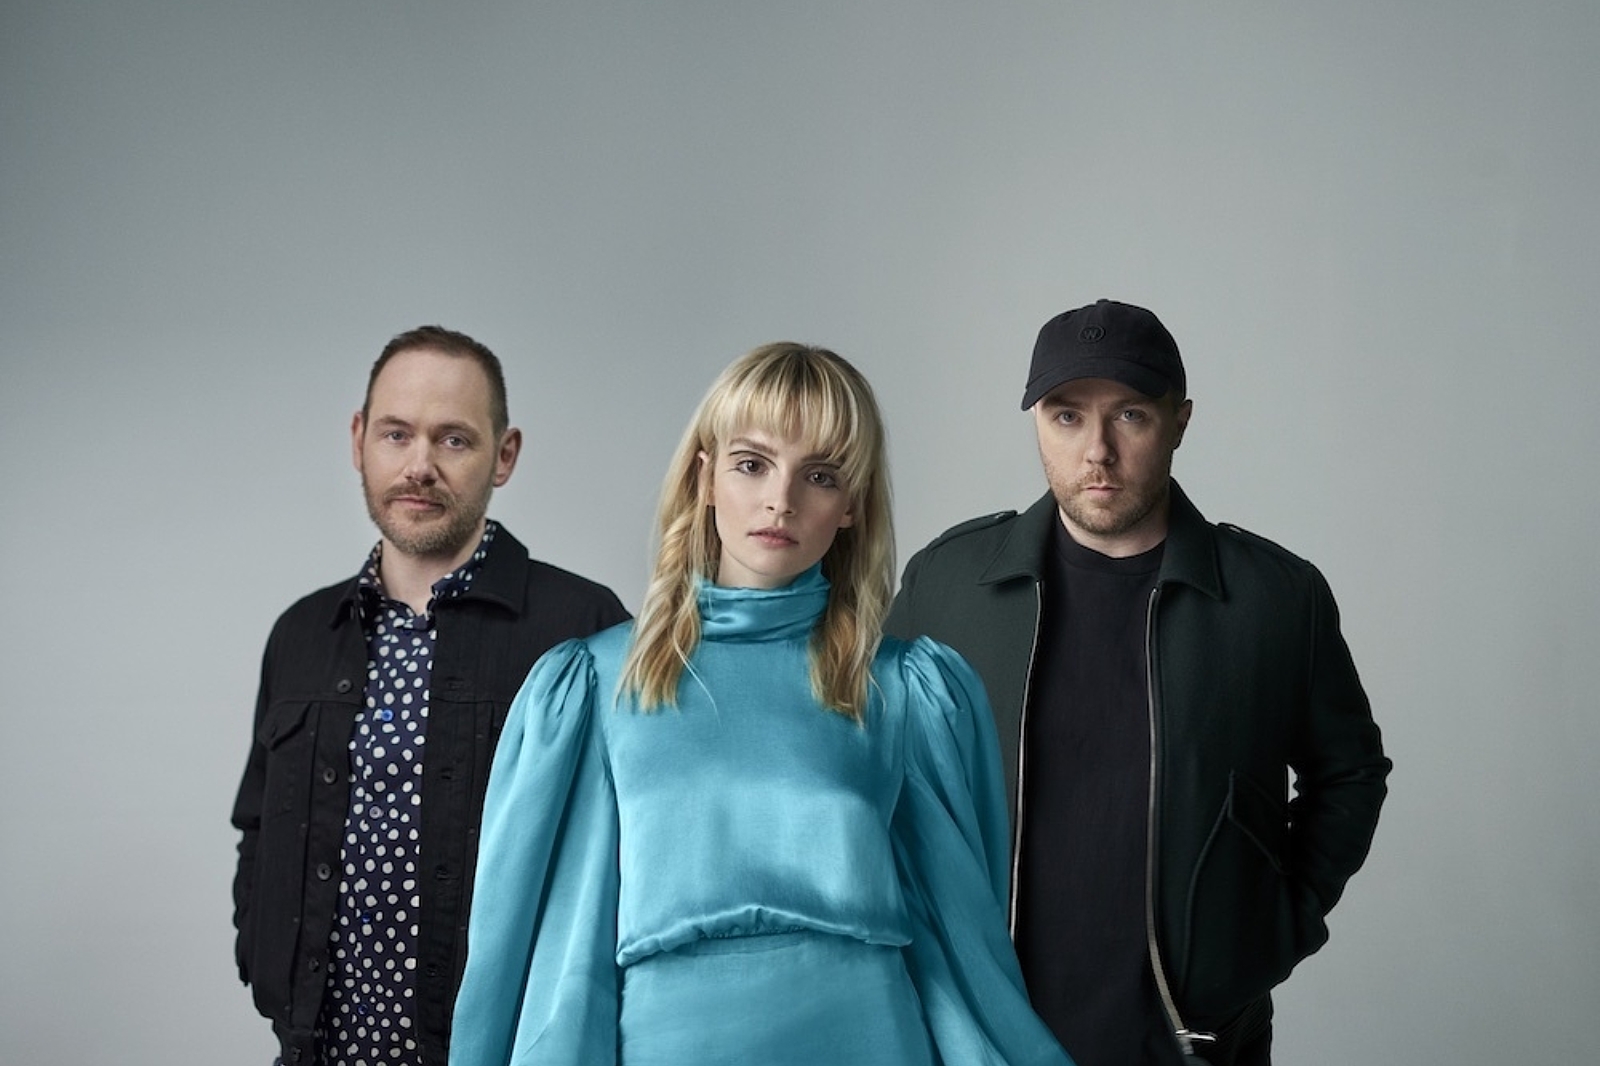 Chvrches cover The Lost Boys theme 'Cry Little Sister'